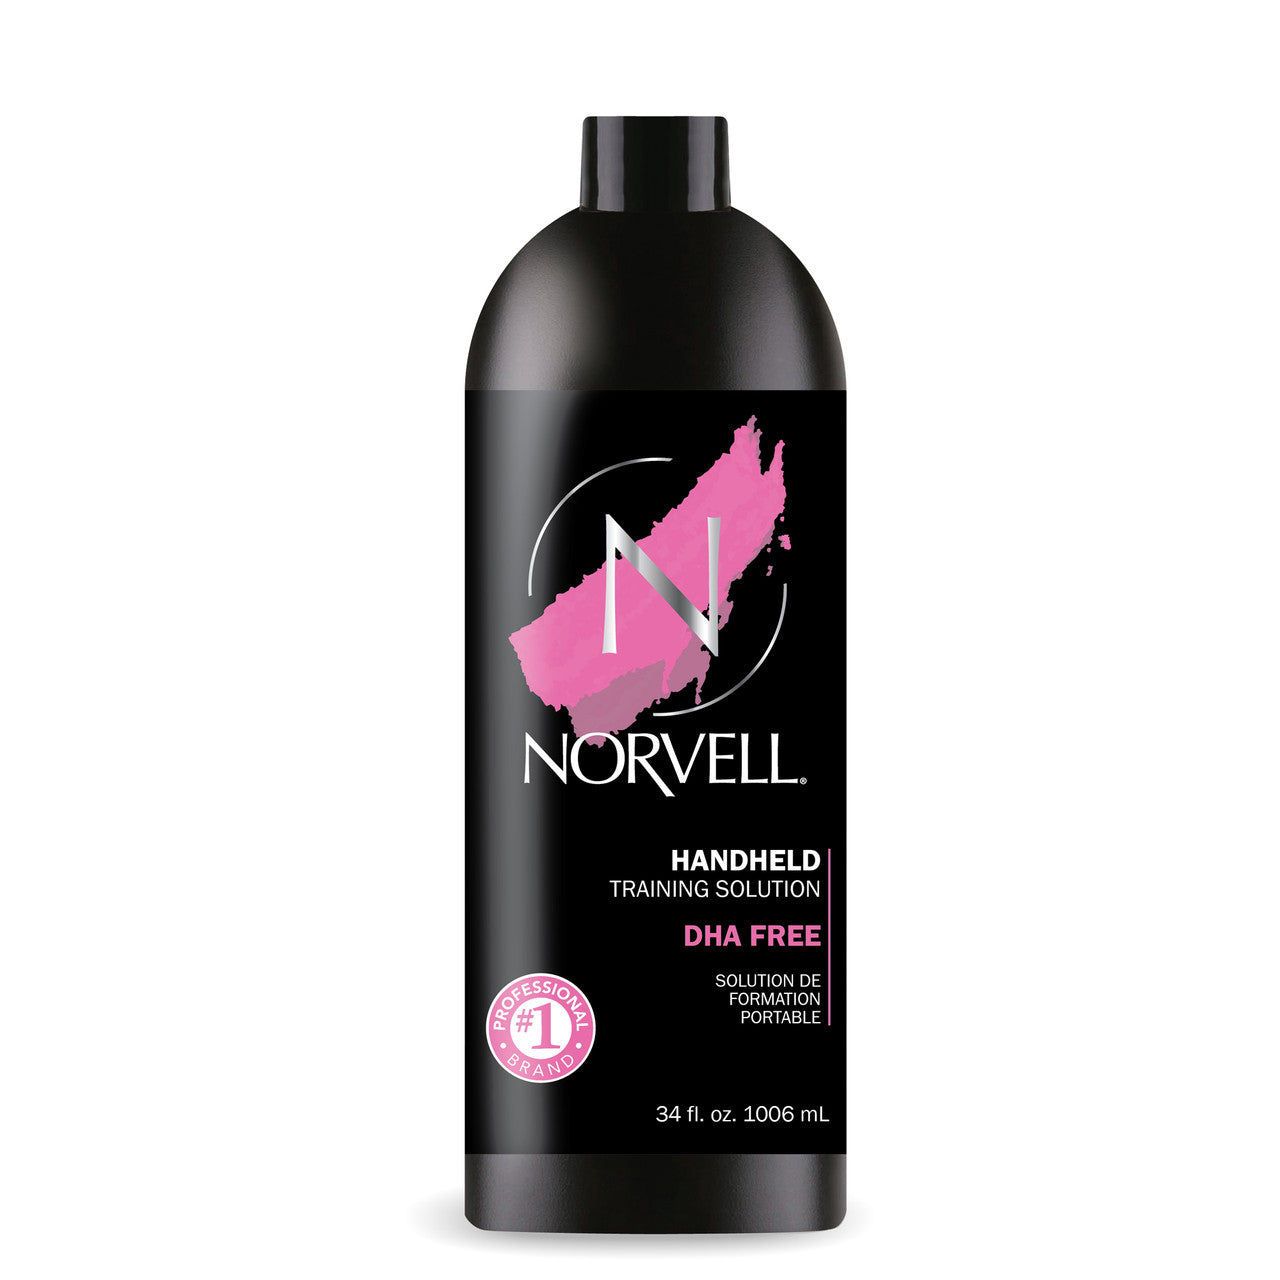 Norvell Training Sunless Solution (DHA Free)